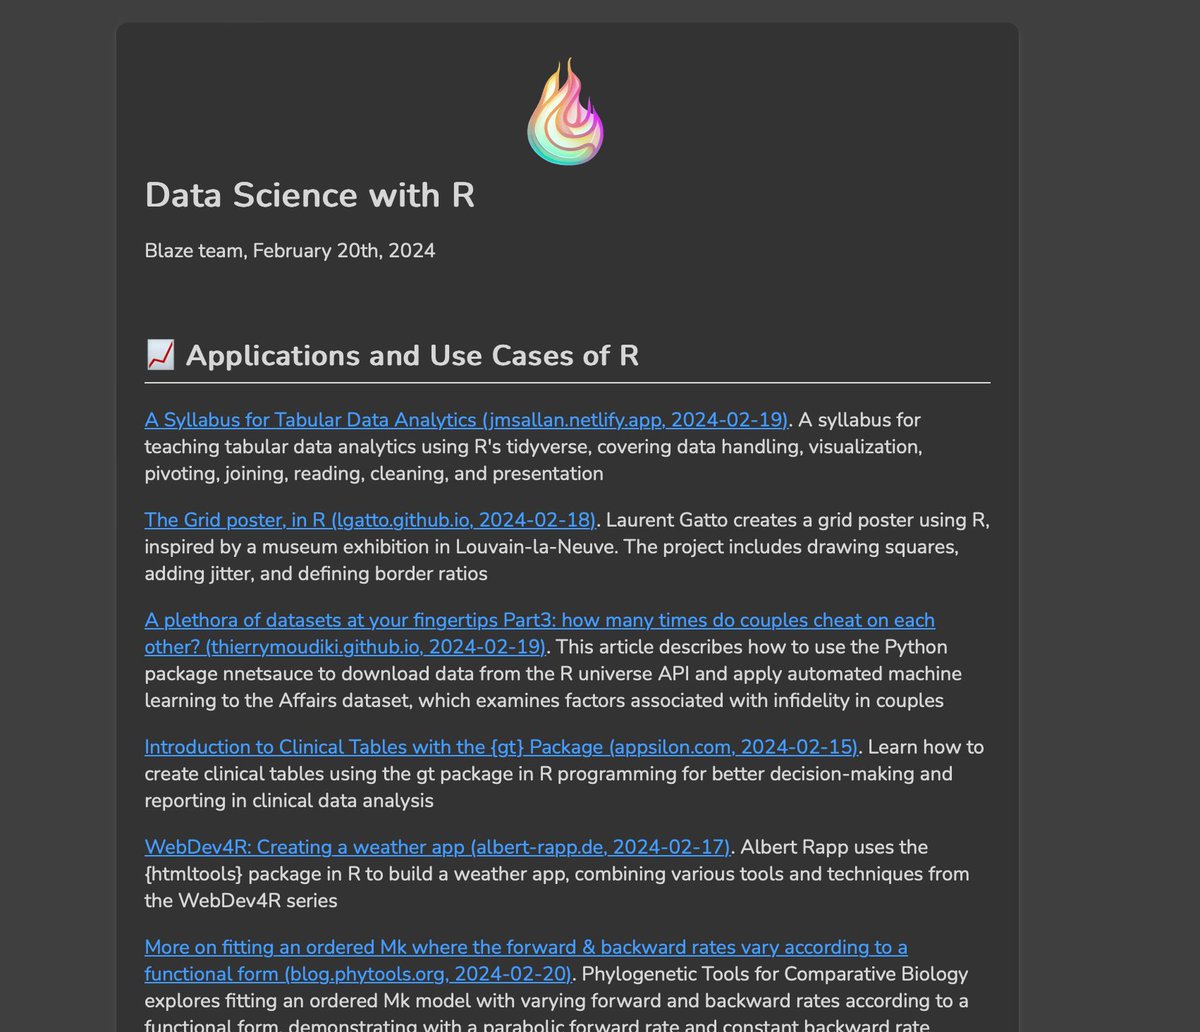 Data science with R: blaze.email newsletter just out! A digest of everything from the #rstats community over the last week. 📄 PDF version here: buff.ly/3SWhY8j ✉️ or subscribe to get future editions by email buff.ly/3w3IbZE Thanks! 😊